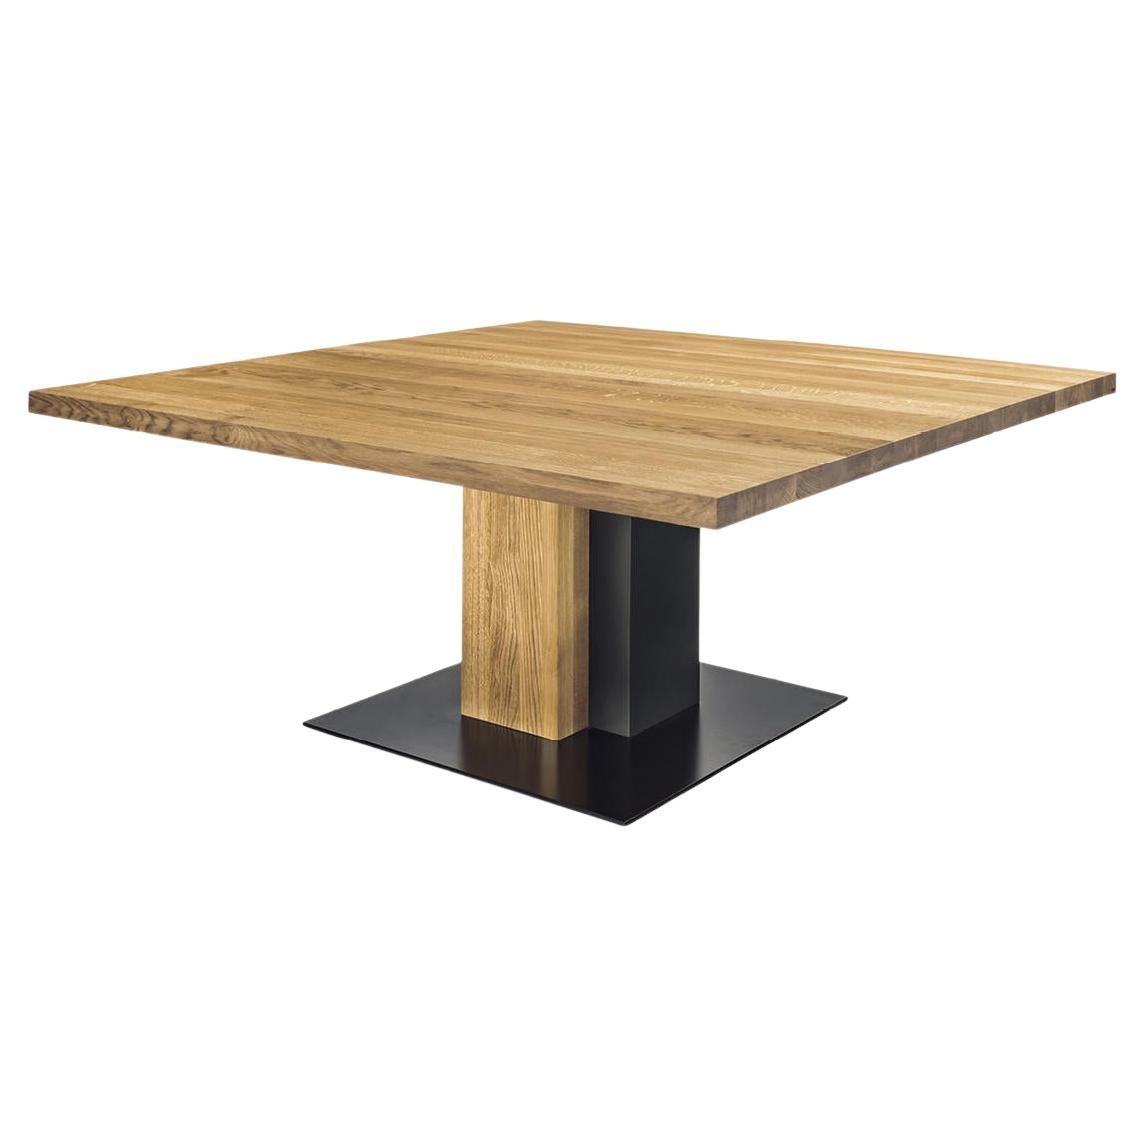 Modern Rectangular Table Made to Order in Solid Oak with Knots & Lacquered Iron For Sale